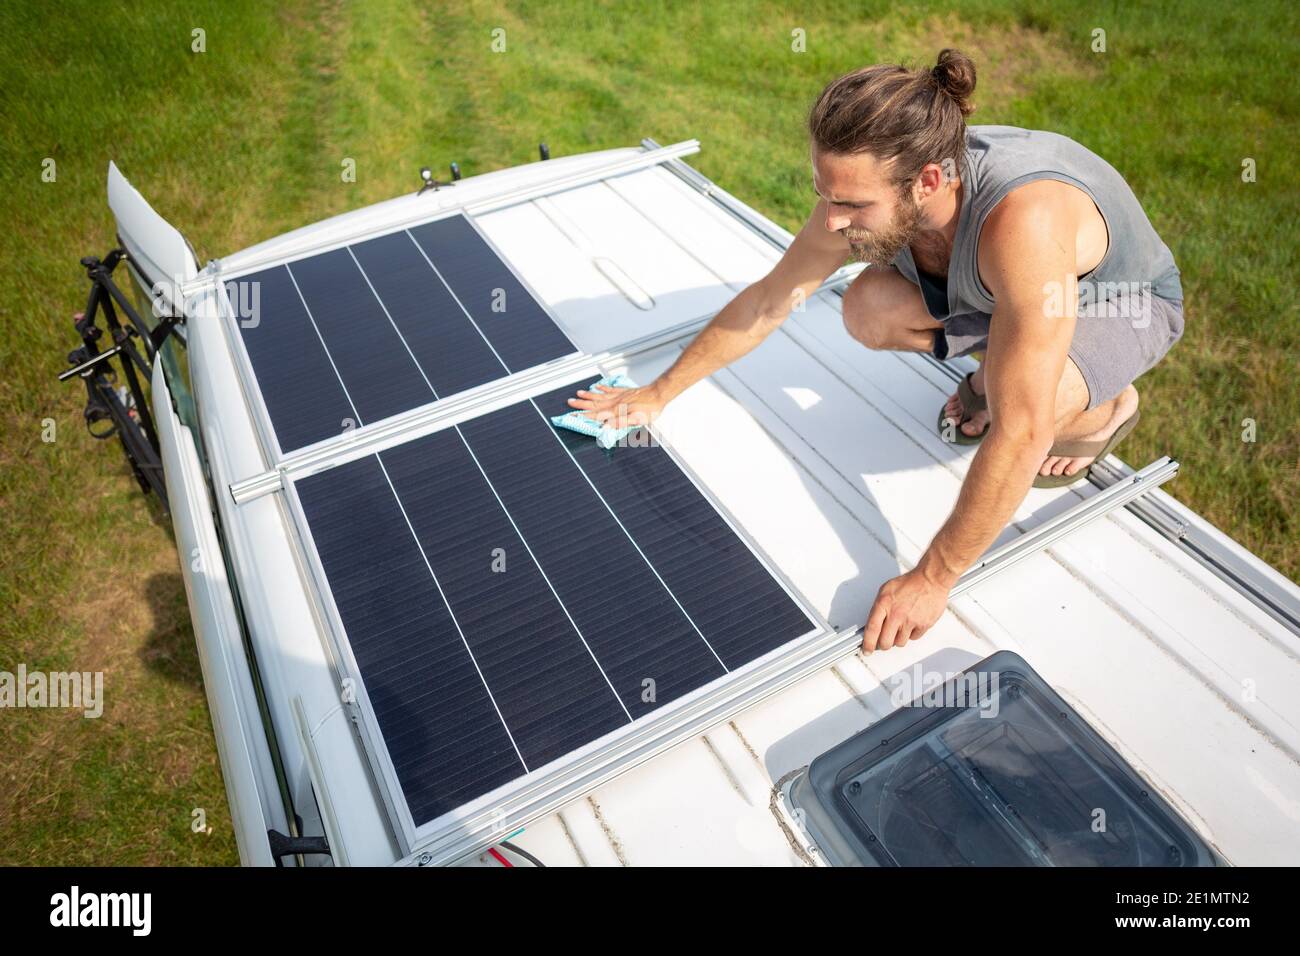 Man cleaning a solar panel on the roof of a camper van Stock Photo